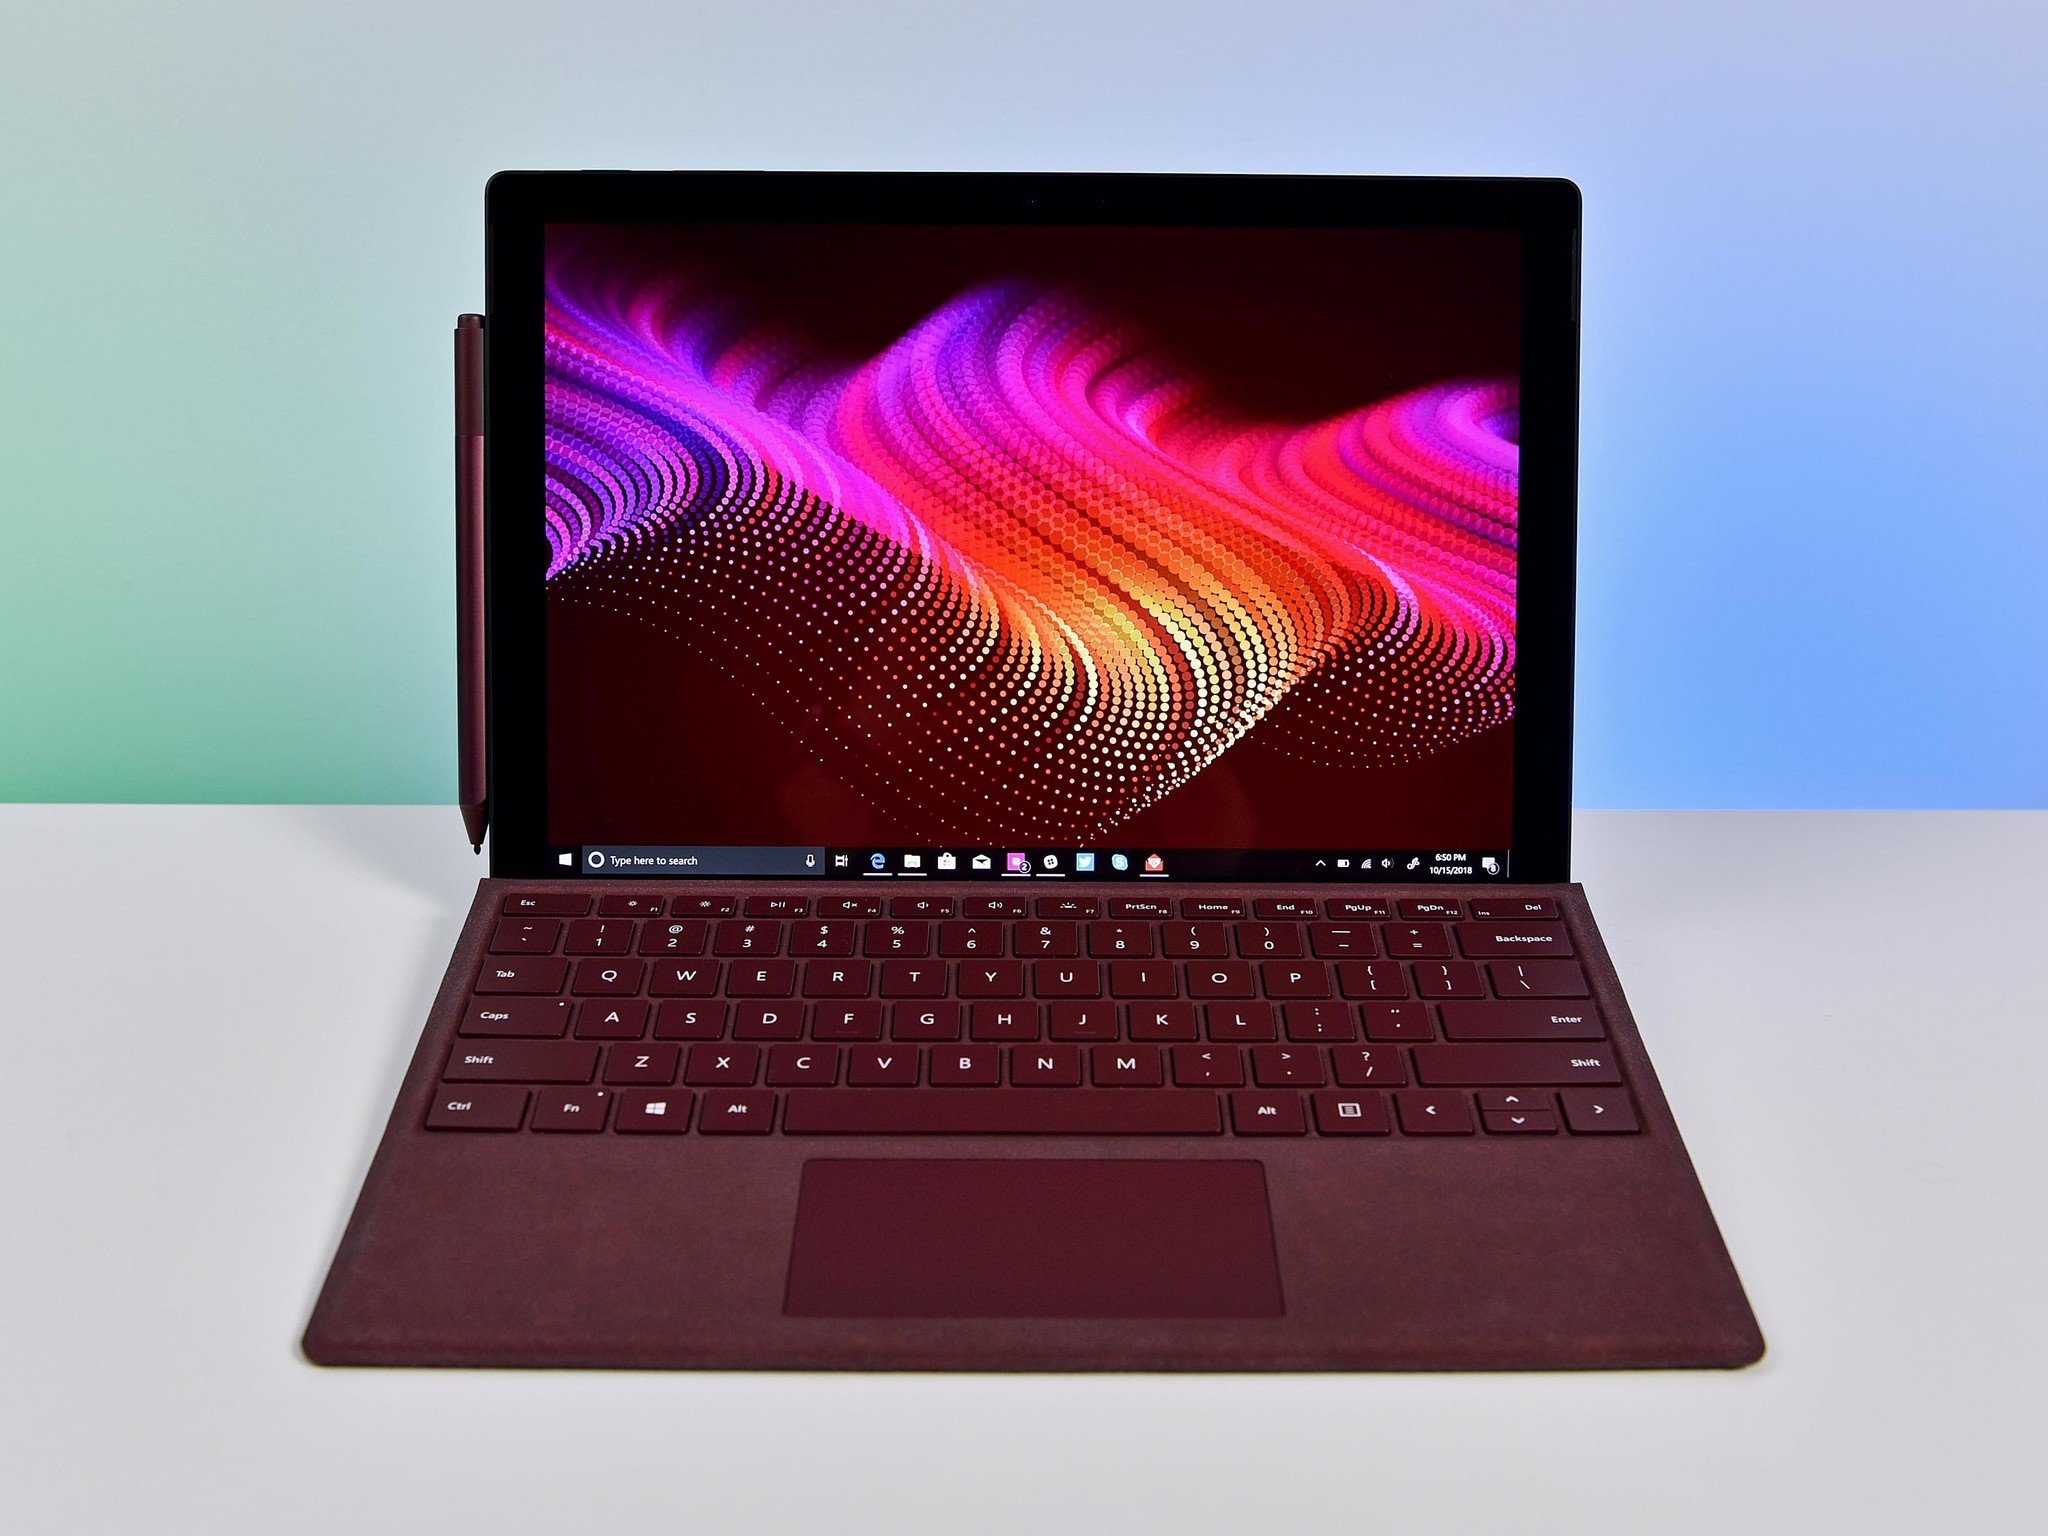 Surface Pro 5 and 6 receive firmware updates to improve security and